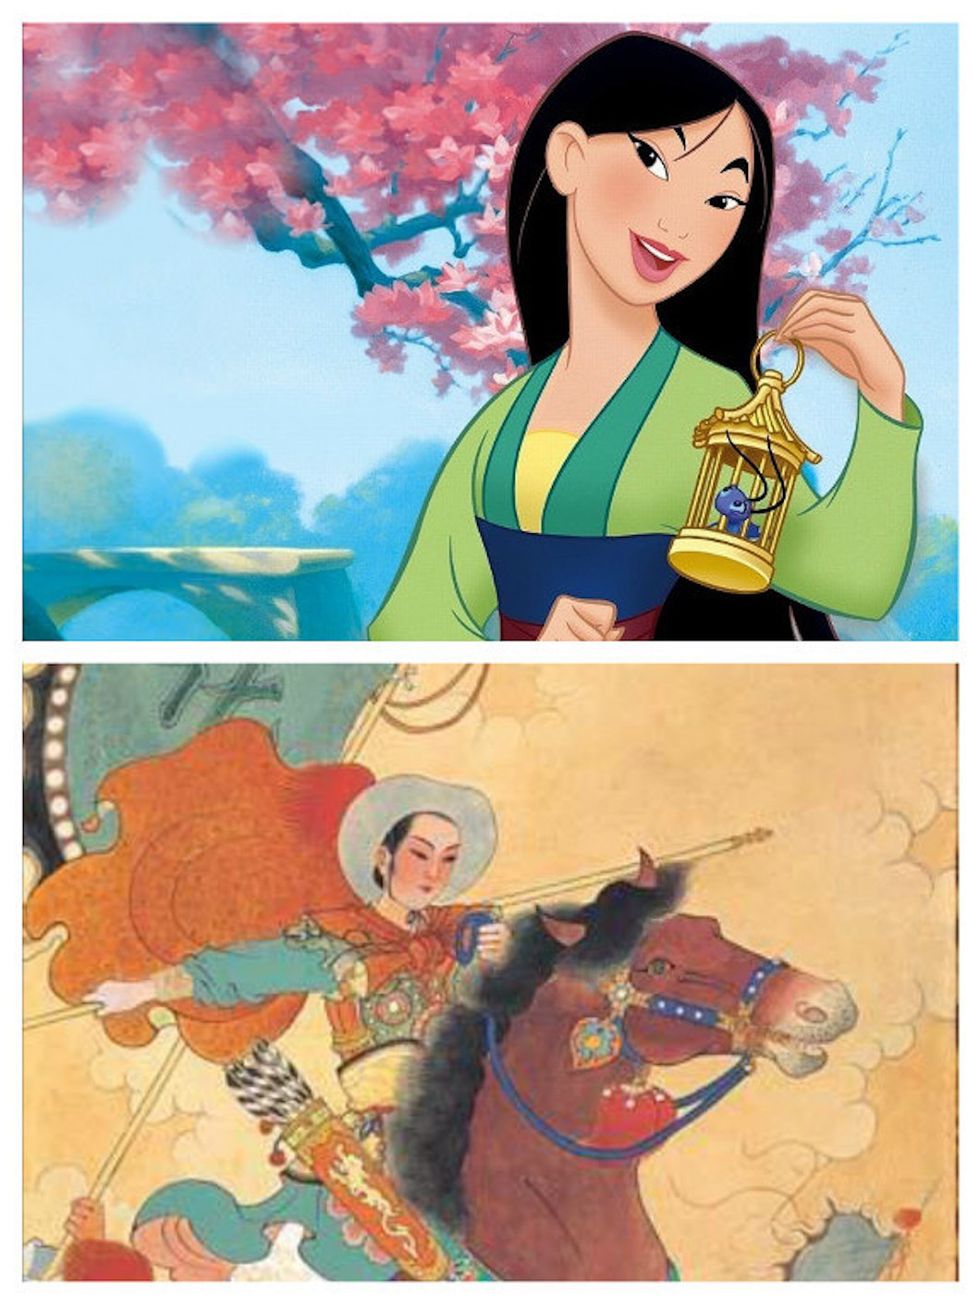 6 Life Lessons We Can Learn from 'Mulan'